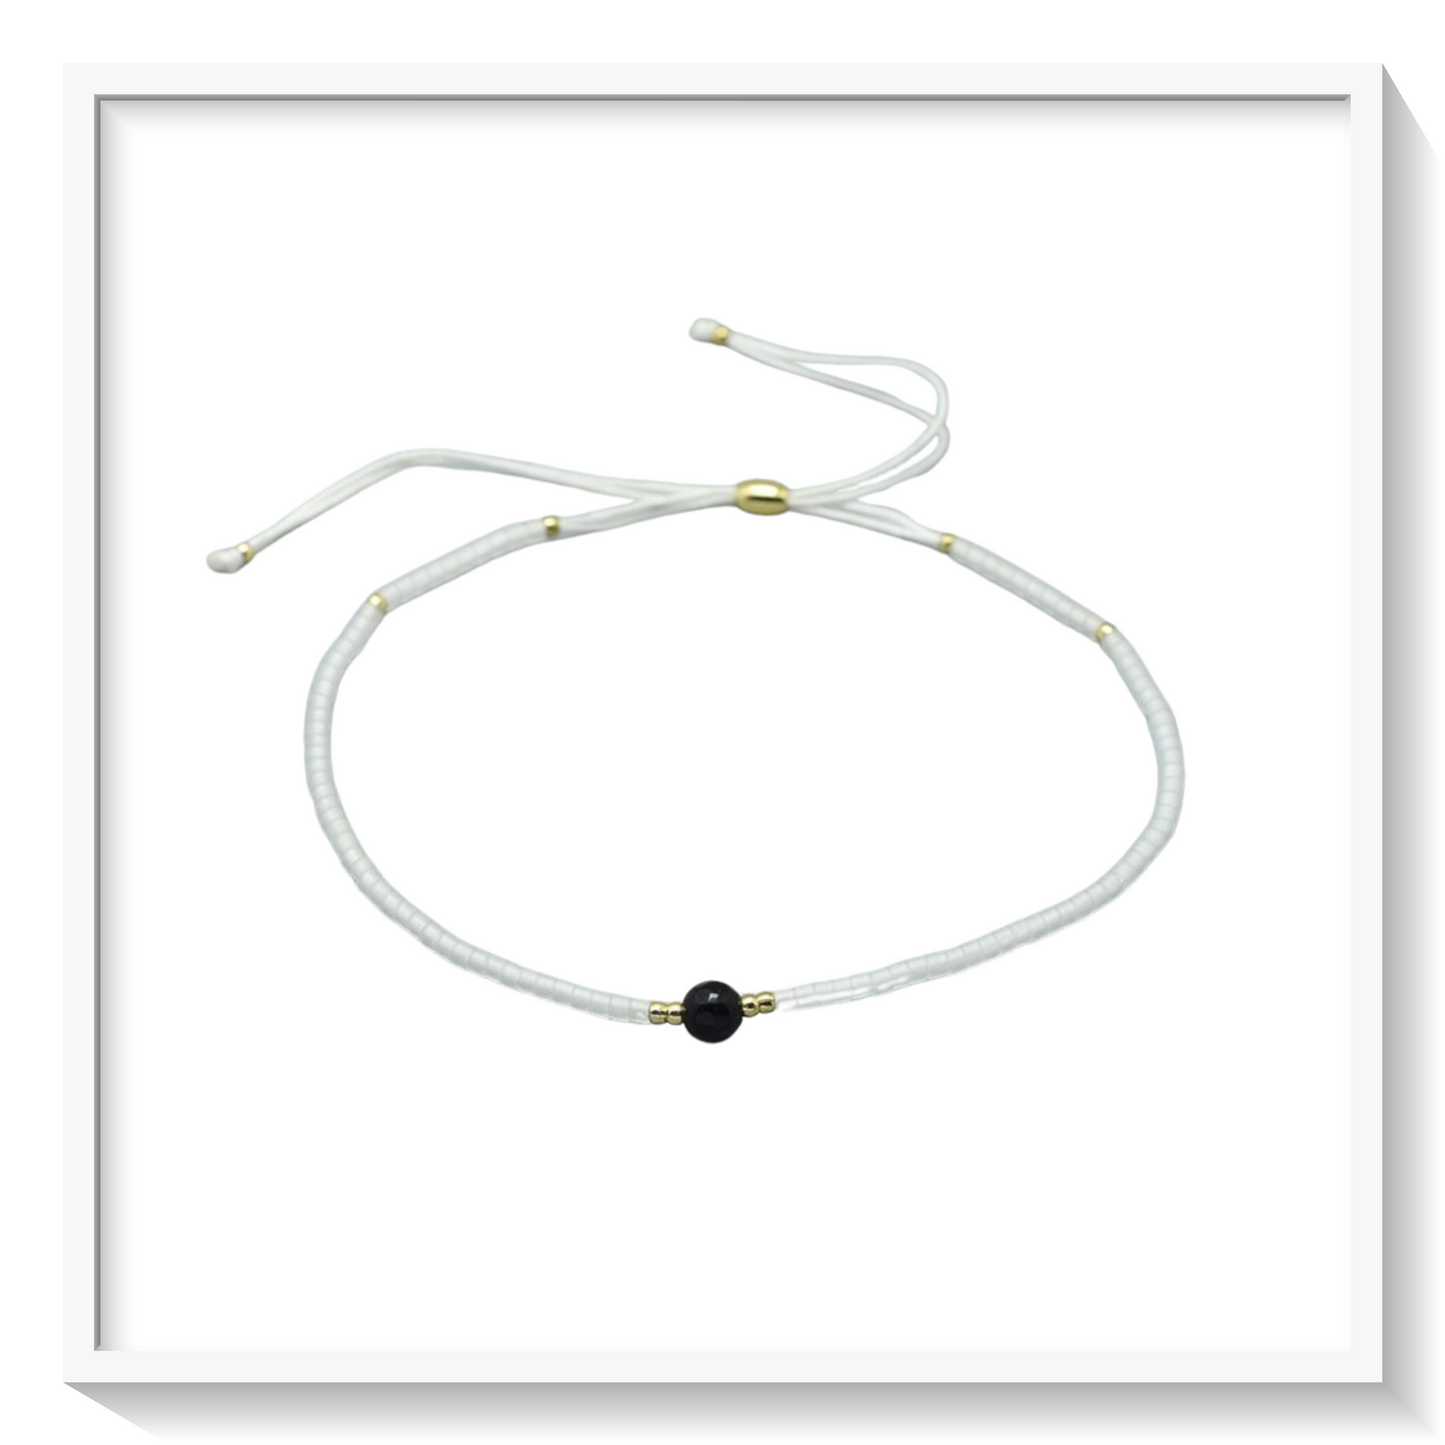 Buy your Black Agate & Seed Bead Adjustable Bracelet online now or in store at Forever Gems in Franschhoek, South Africa